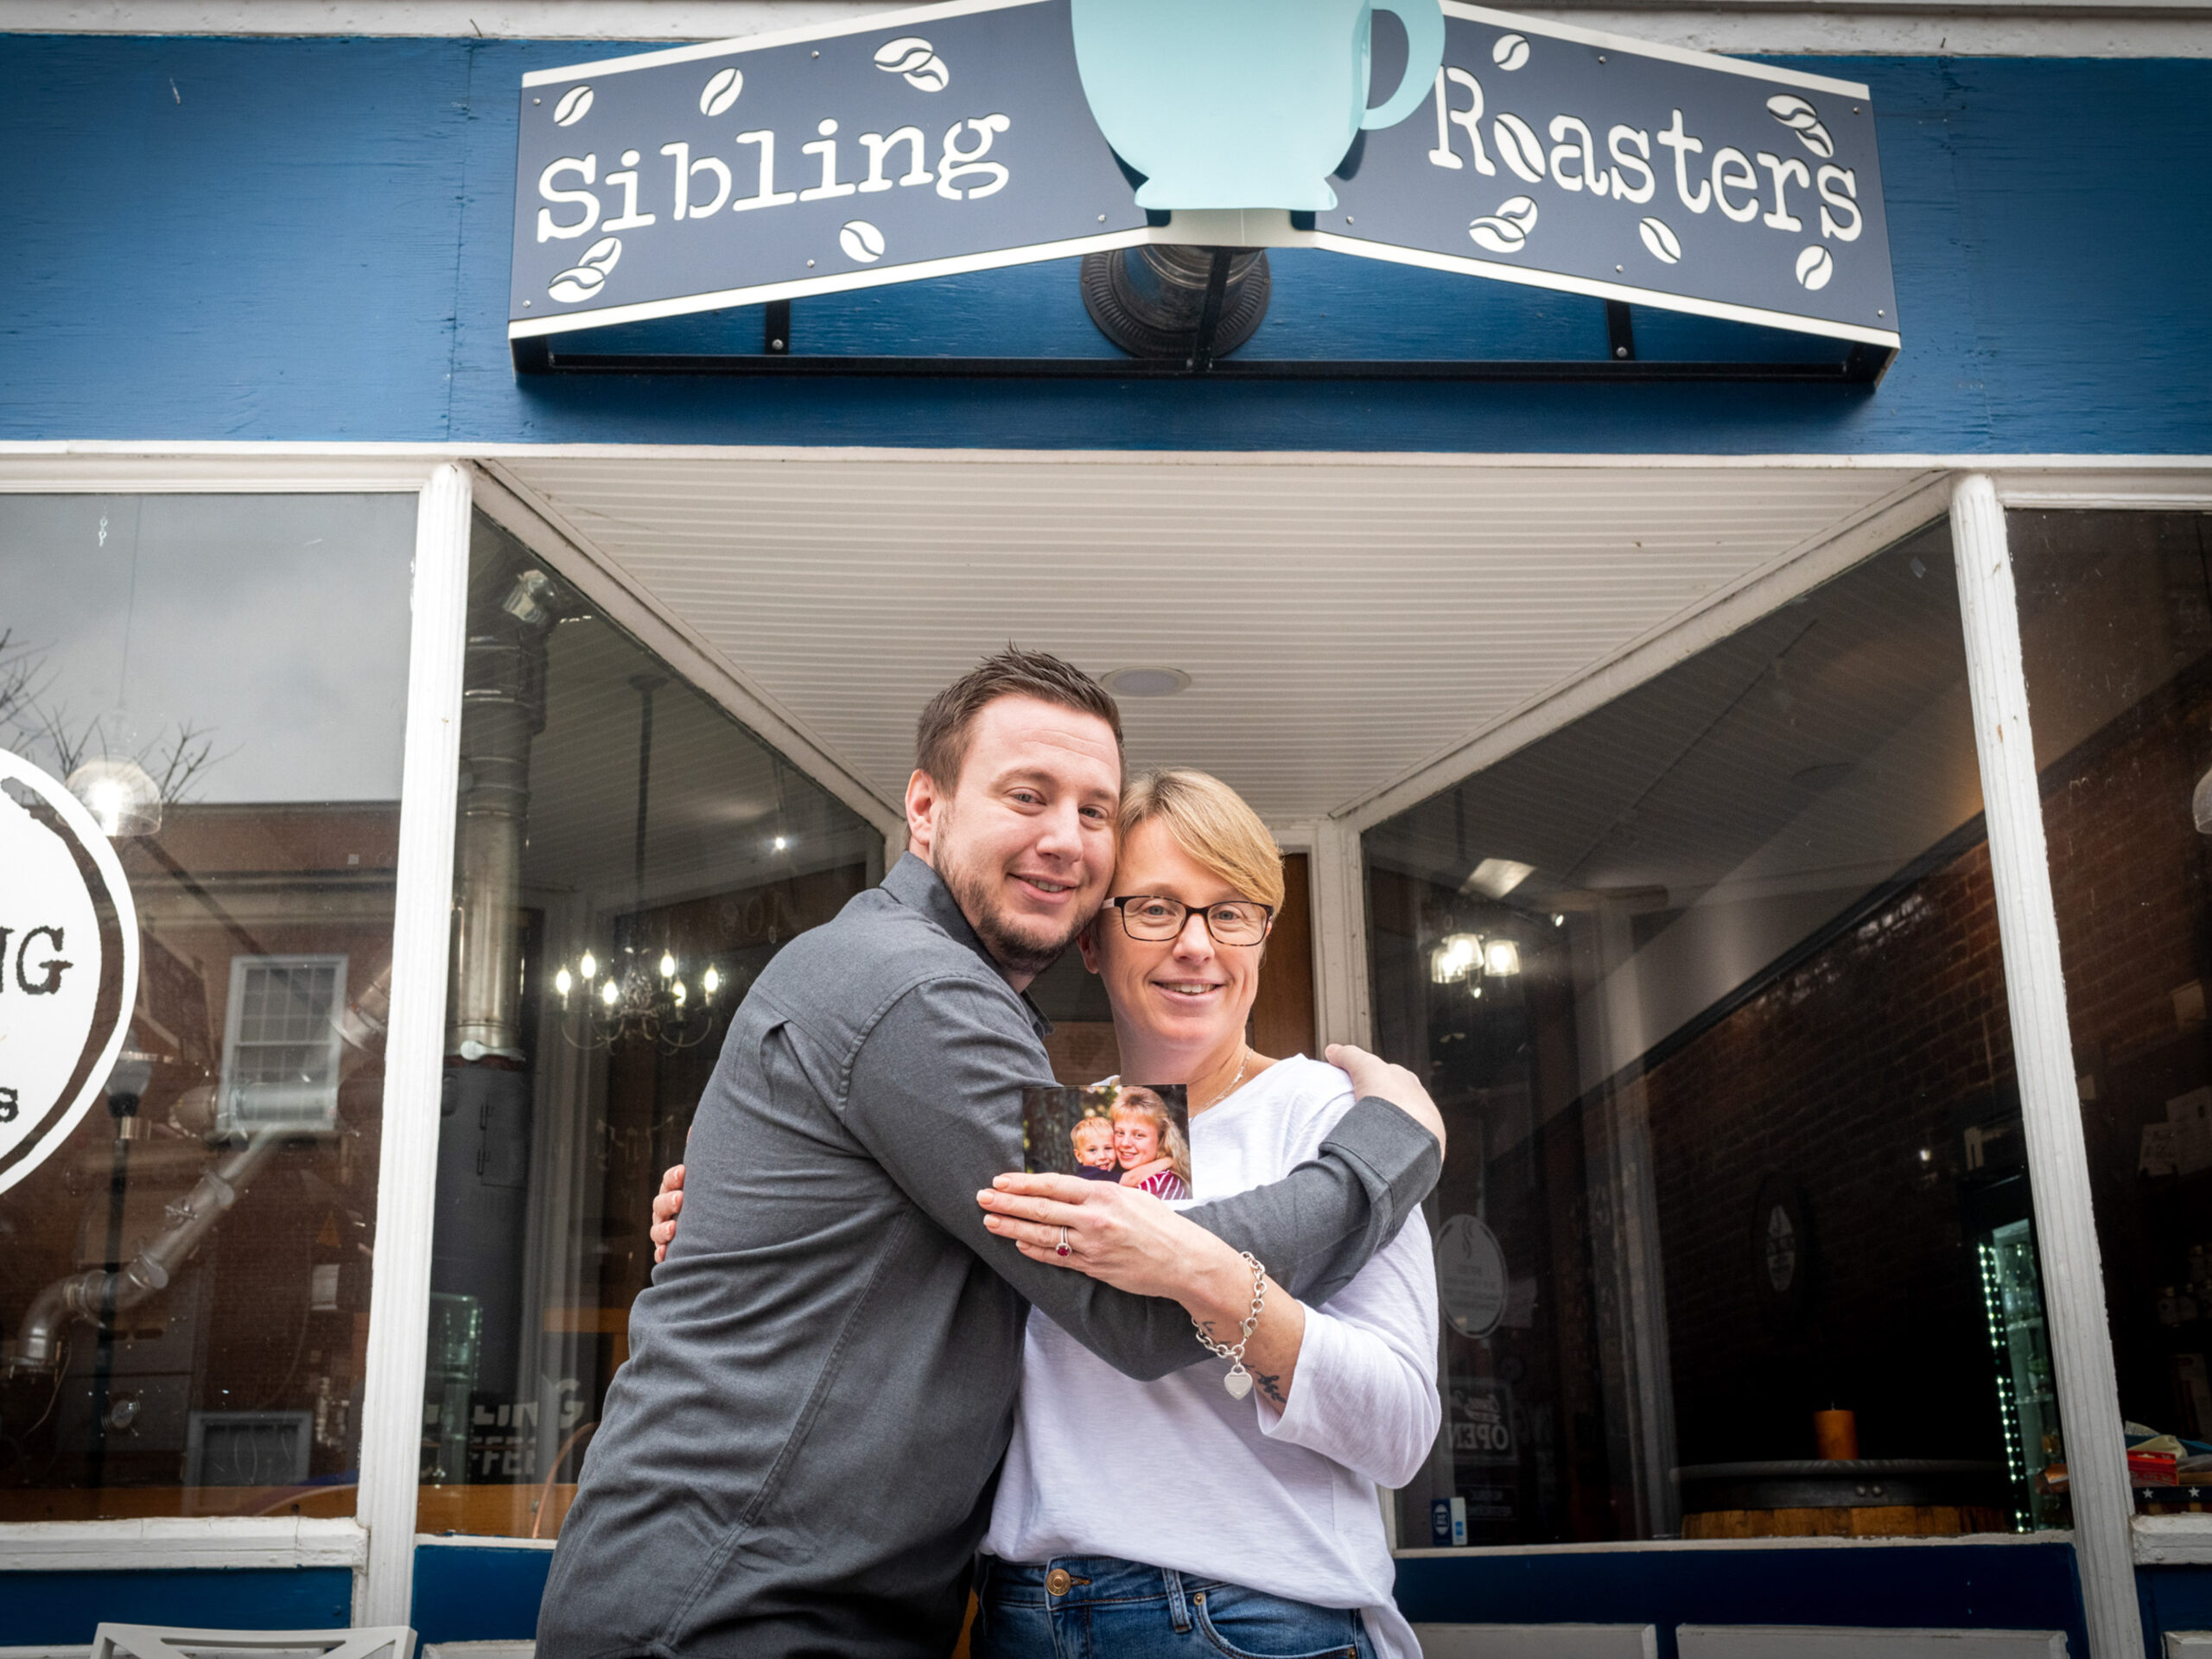 At the heart of this cozy coffee shop lies a big sister’s love for her little brother